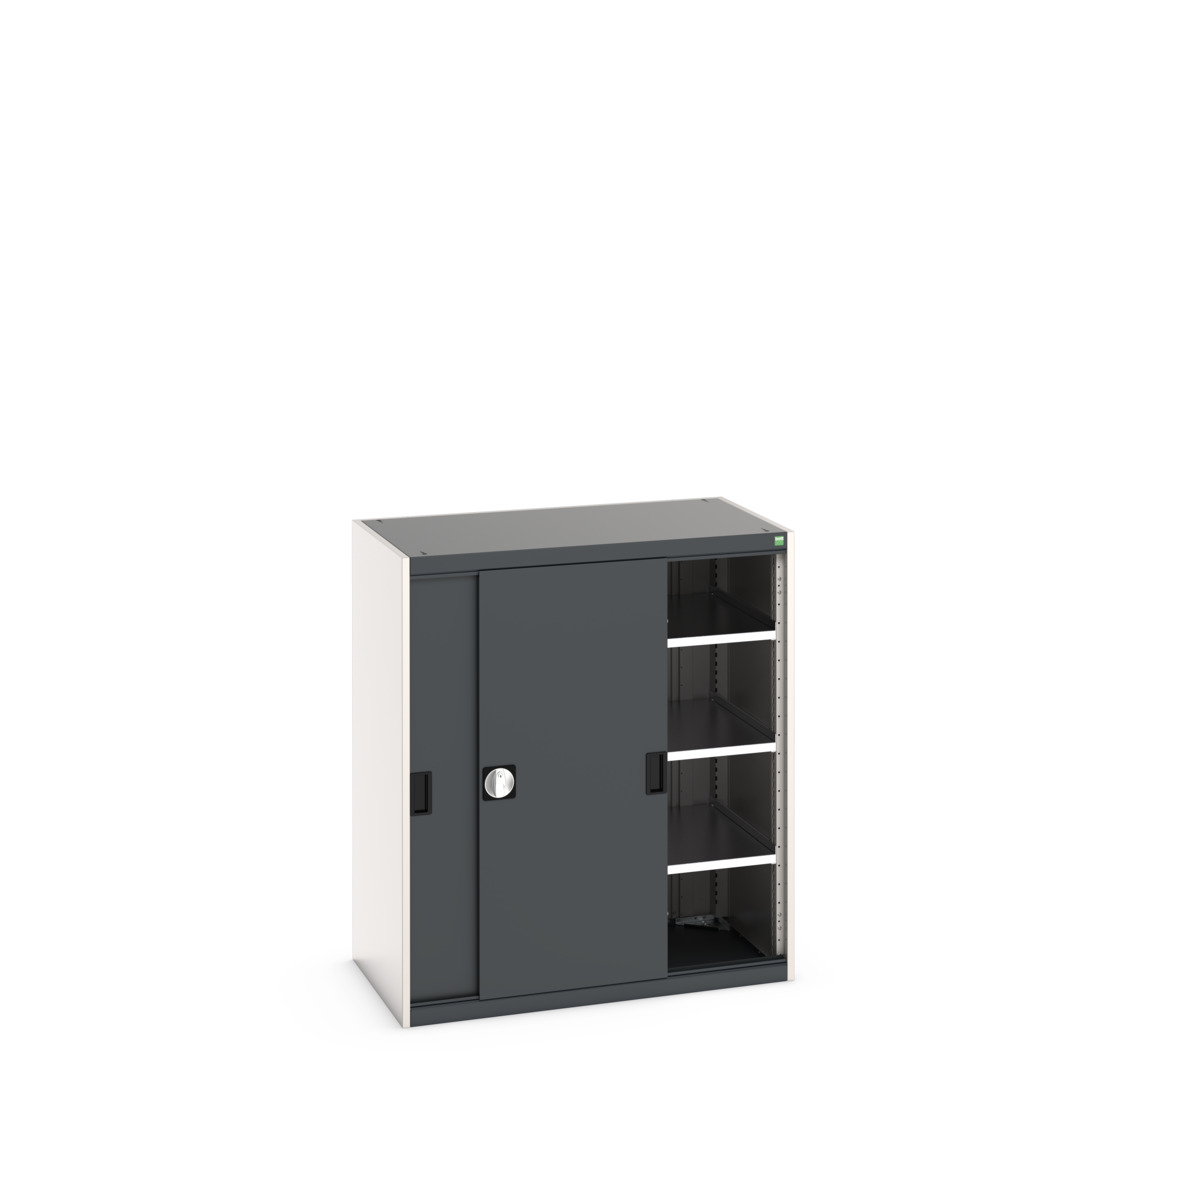 40021139.19V - Armoire Cubio SMS-10612-1